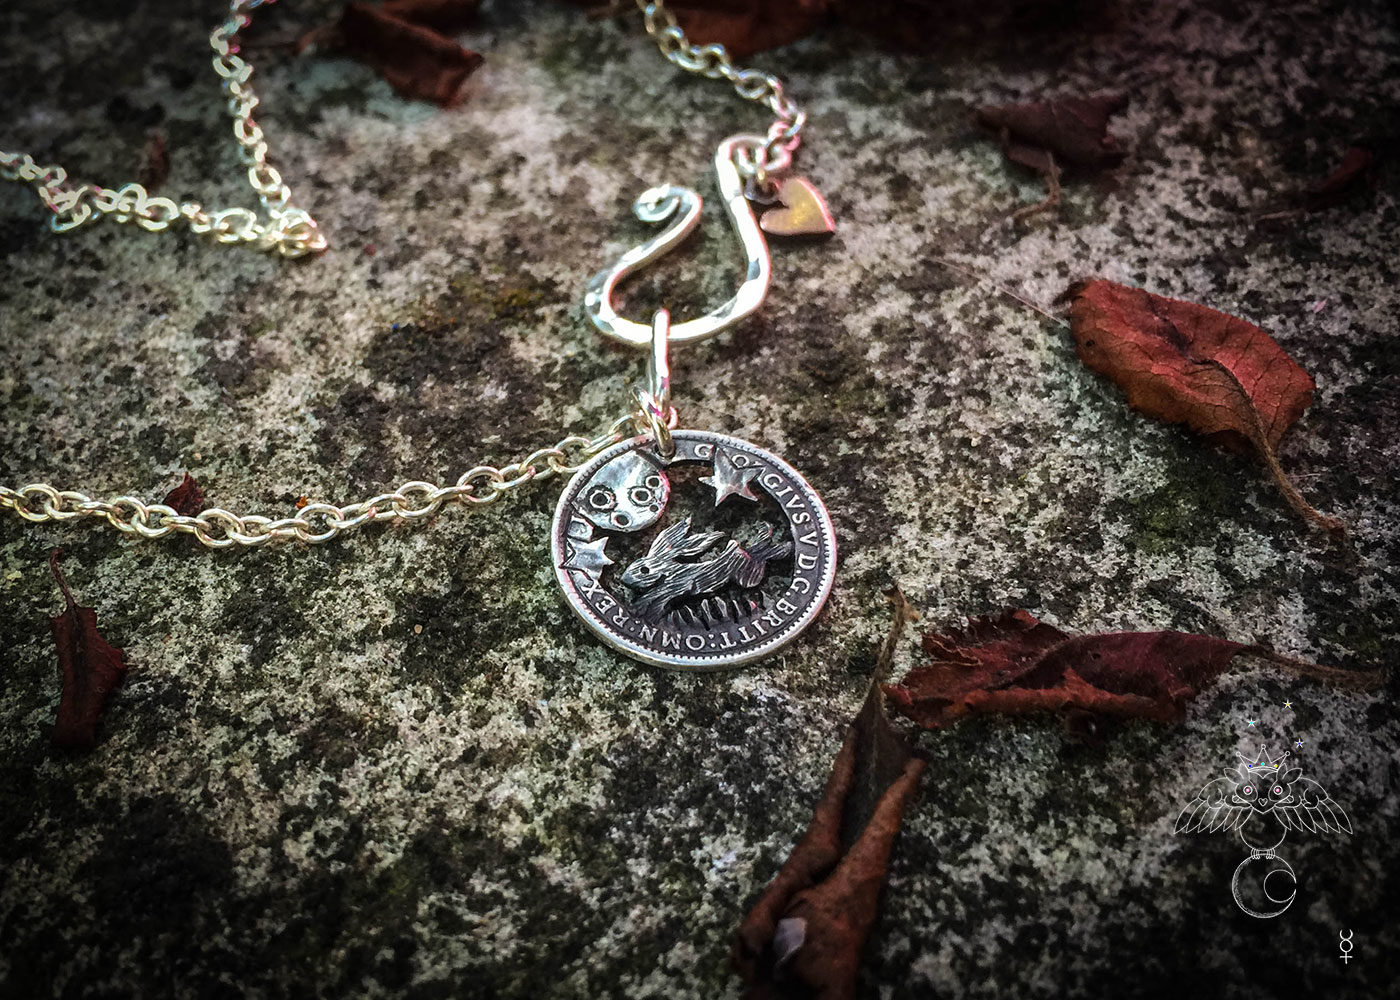 Leaping hare coin jewellery. Magical leaping hare silver necklace handcrafted and eco-conscious.